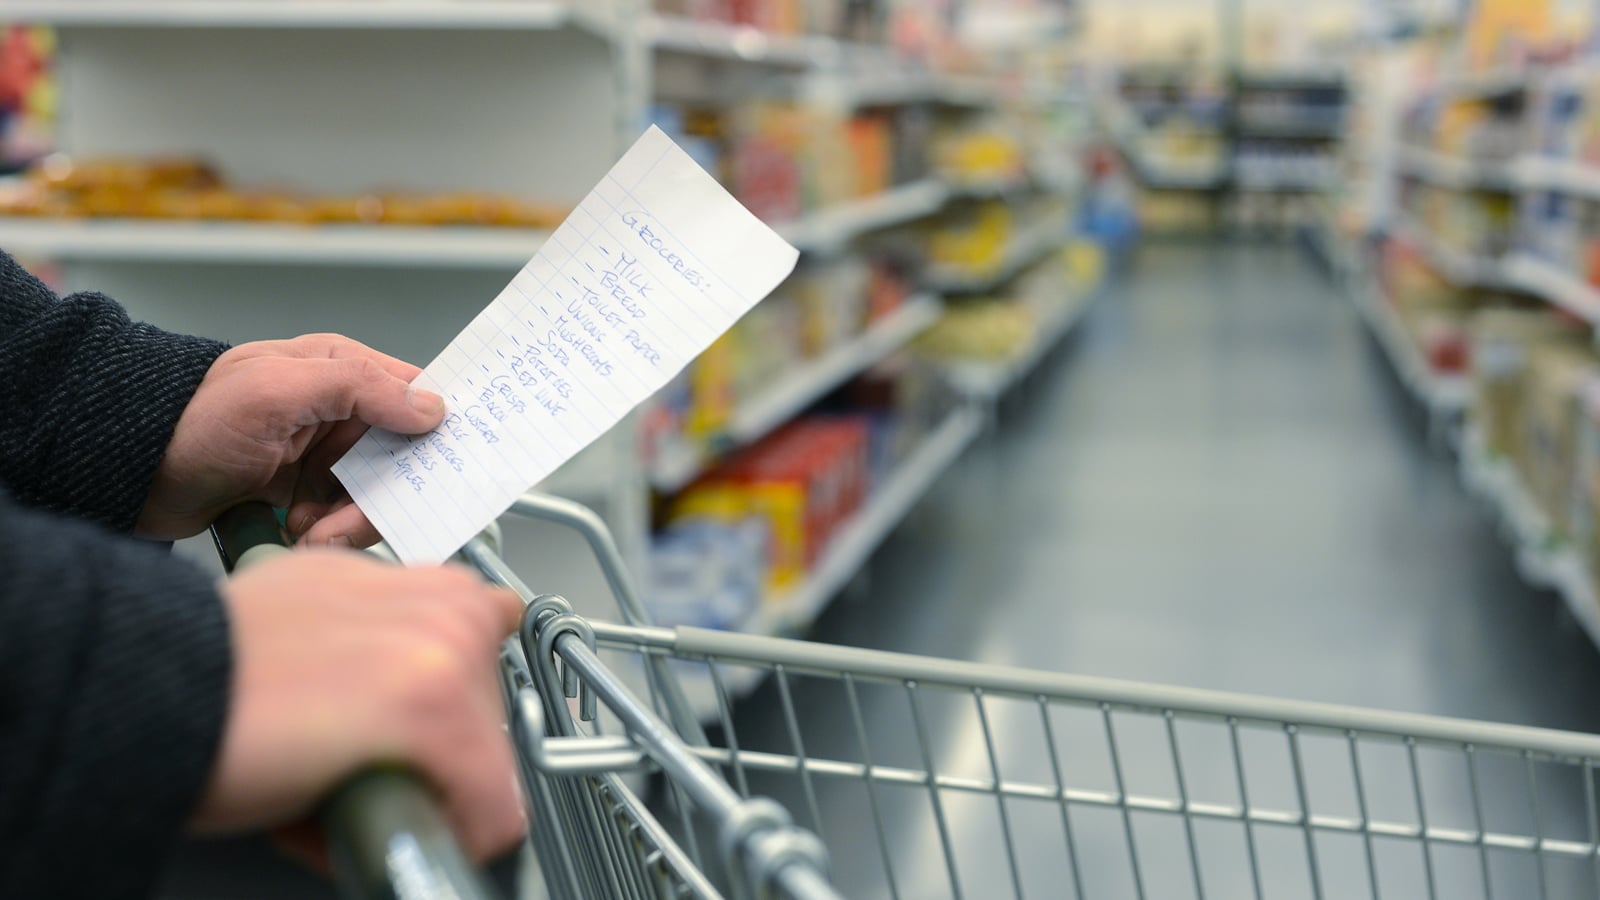 Hand pushing a shopping cart holding a groceries list